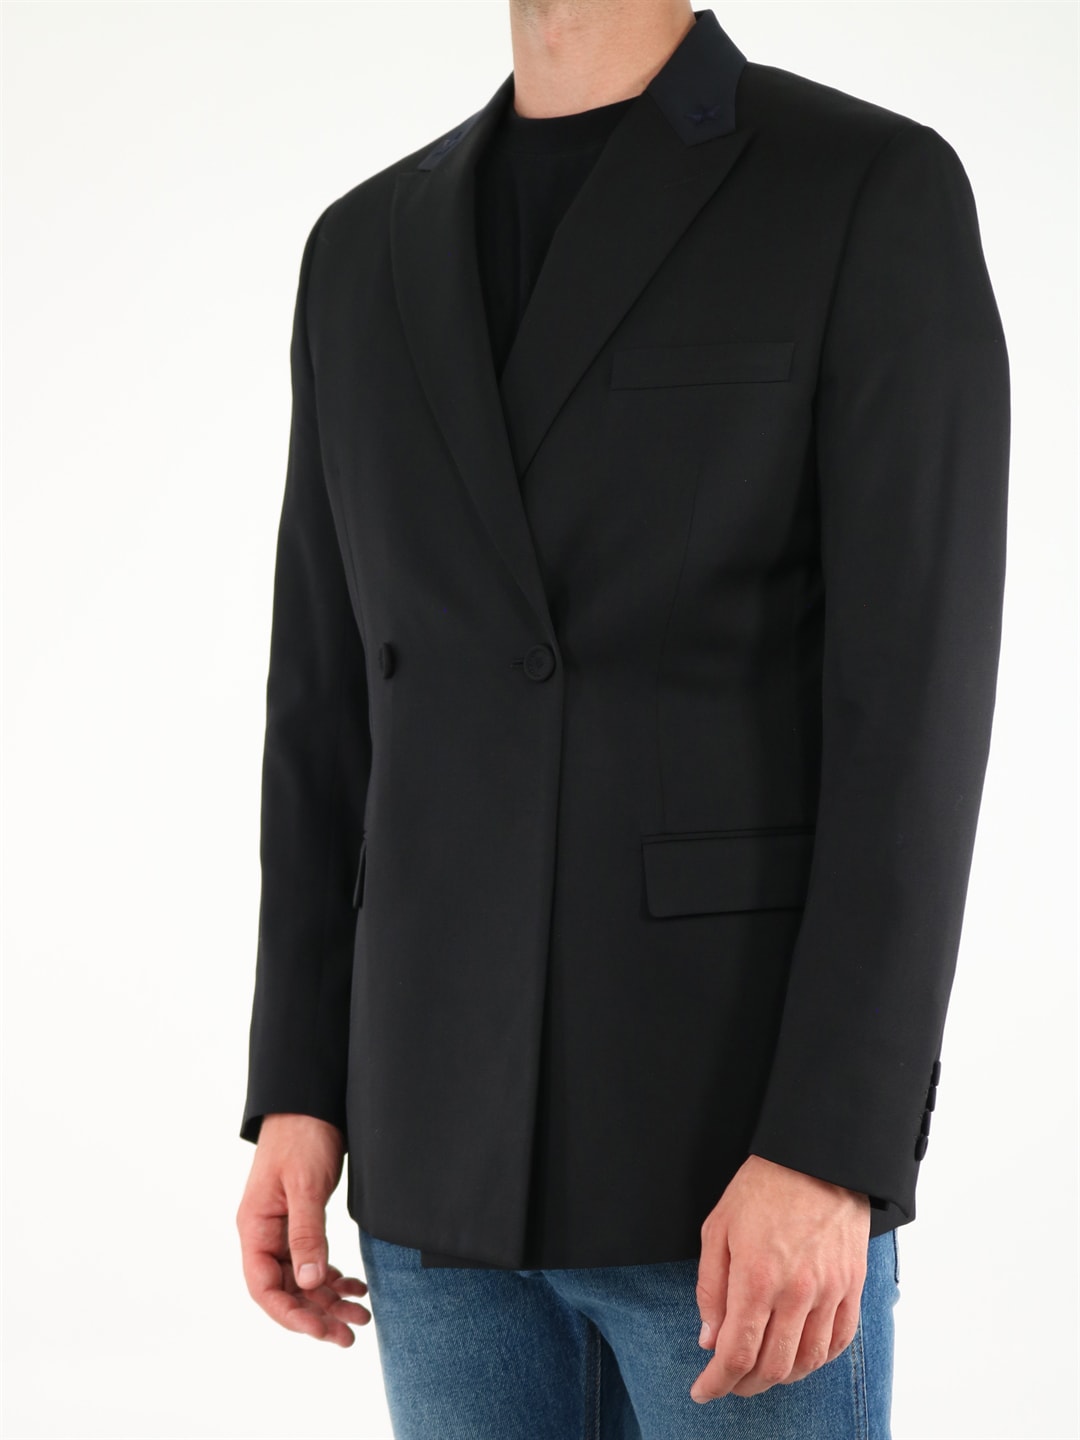 Dior Homme Double-breasted Tailored Jacket